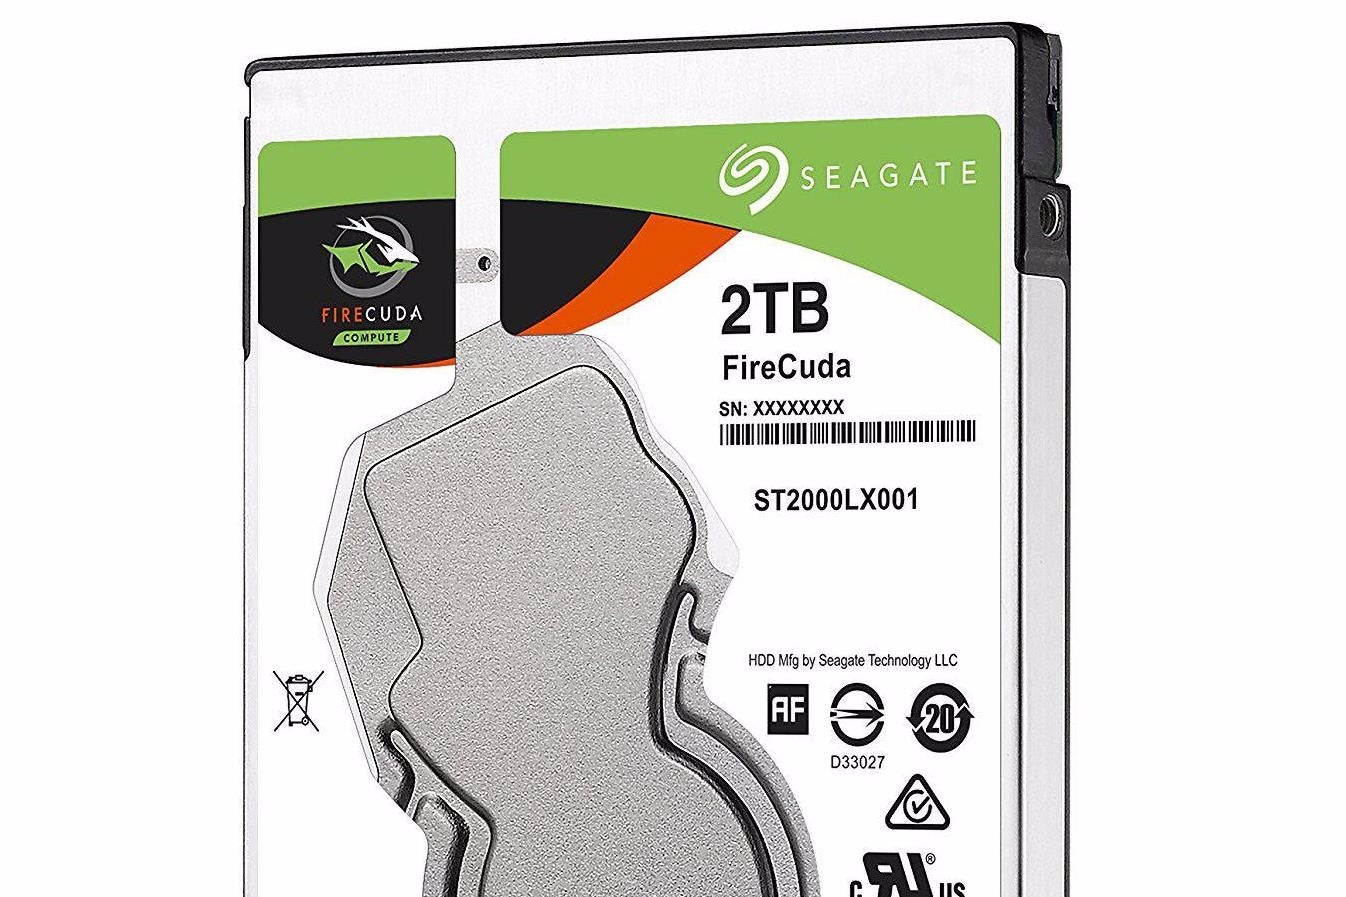 Seagate Firecuda 2TB review: the ultimate PS4 storage upgrade ...